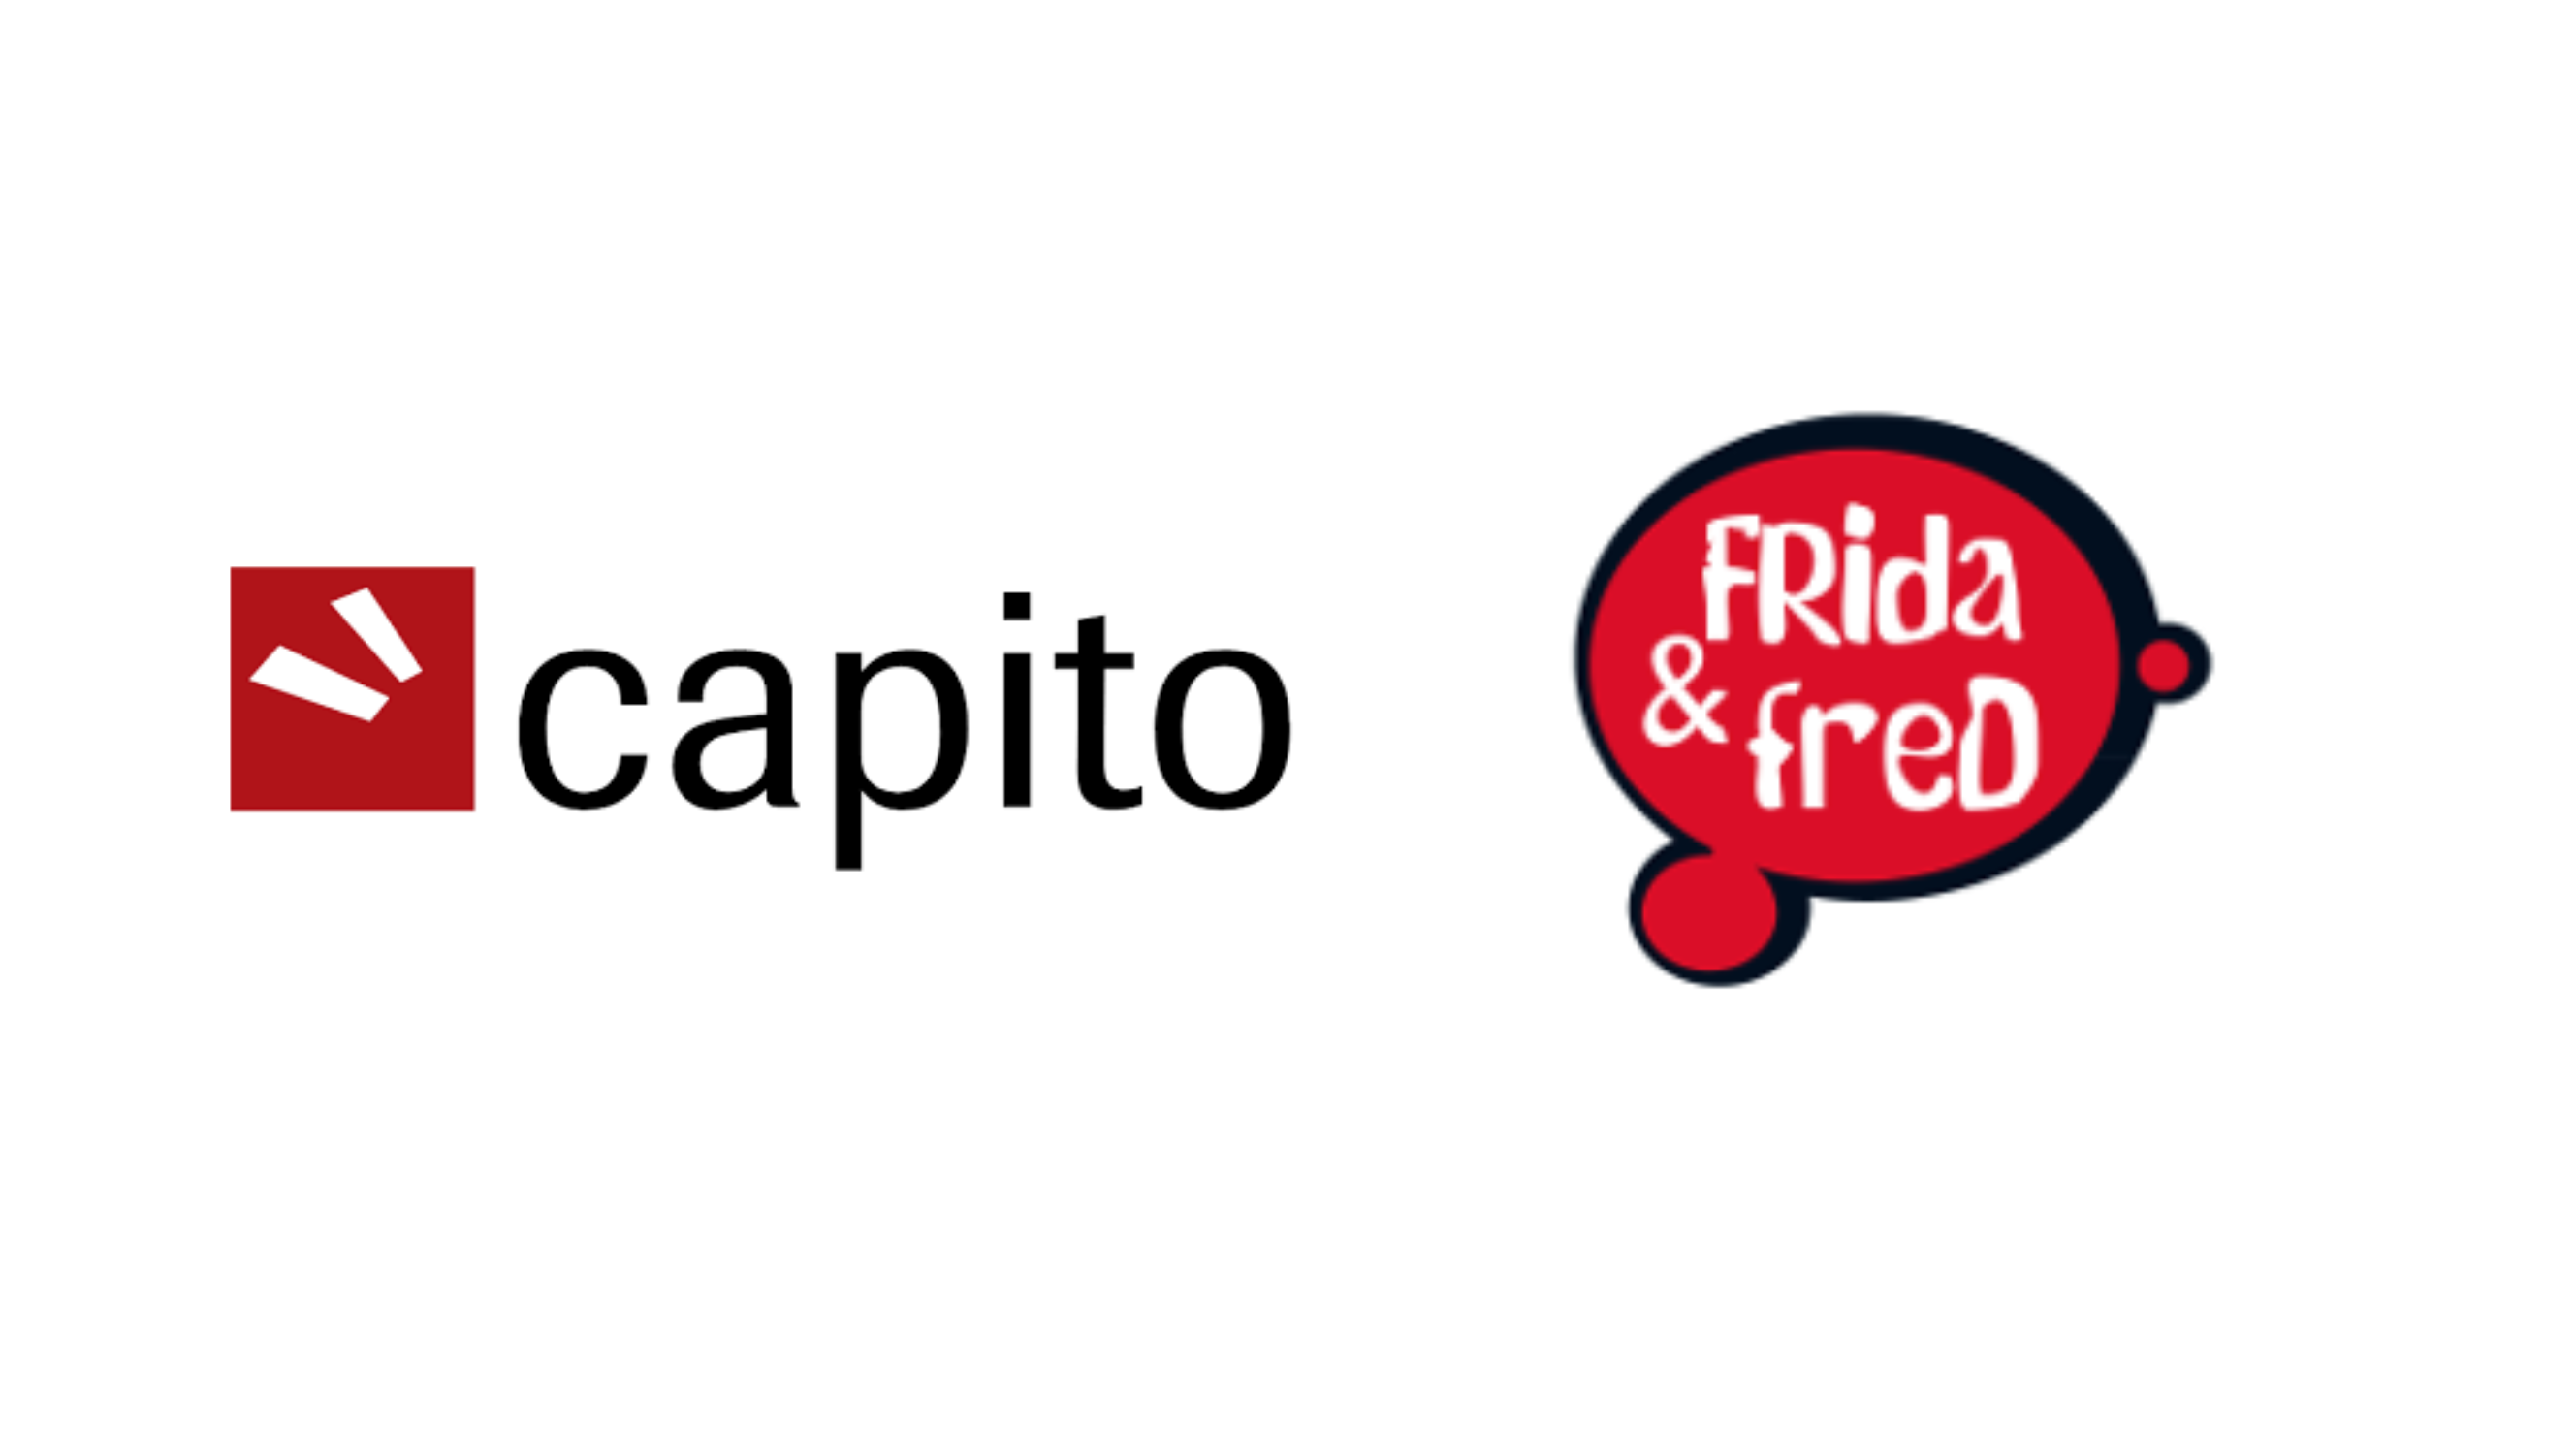 Logo of capito and FRida & freD